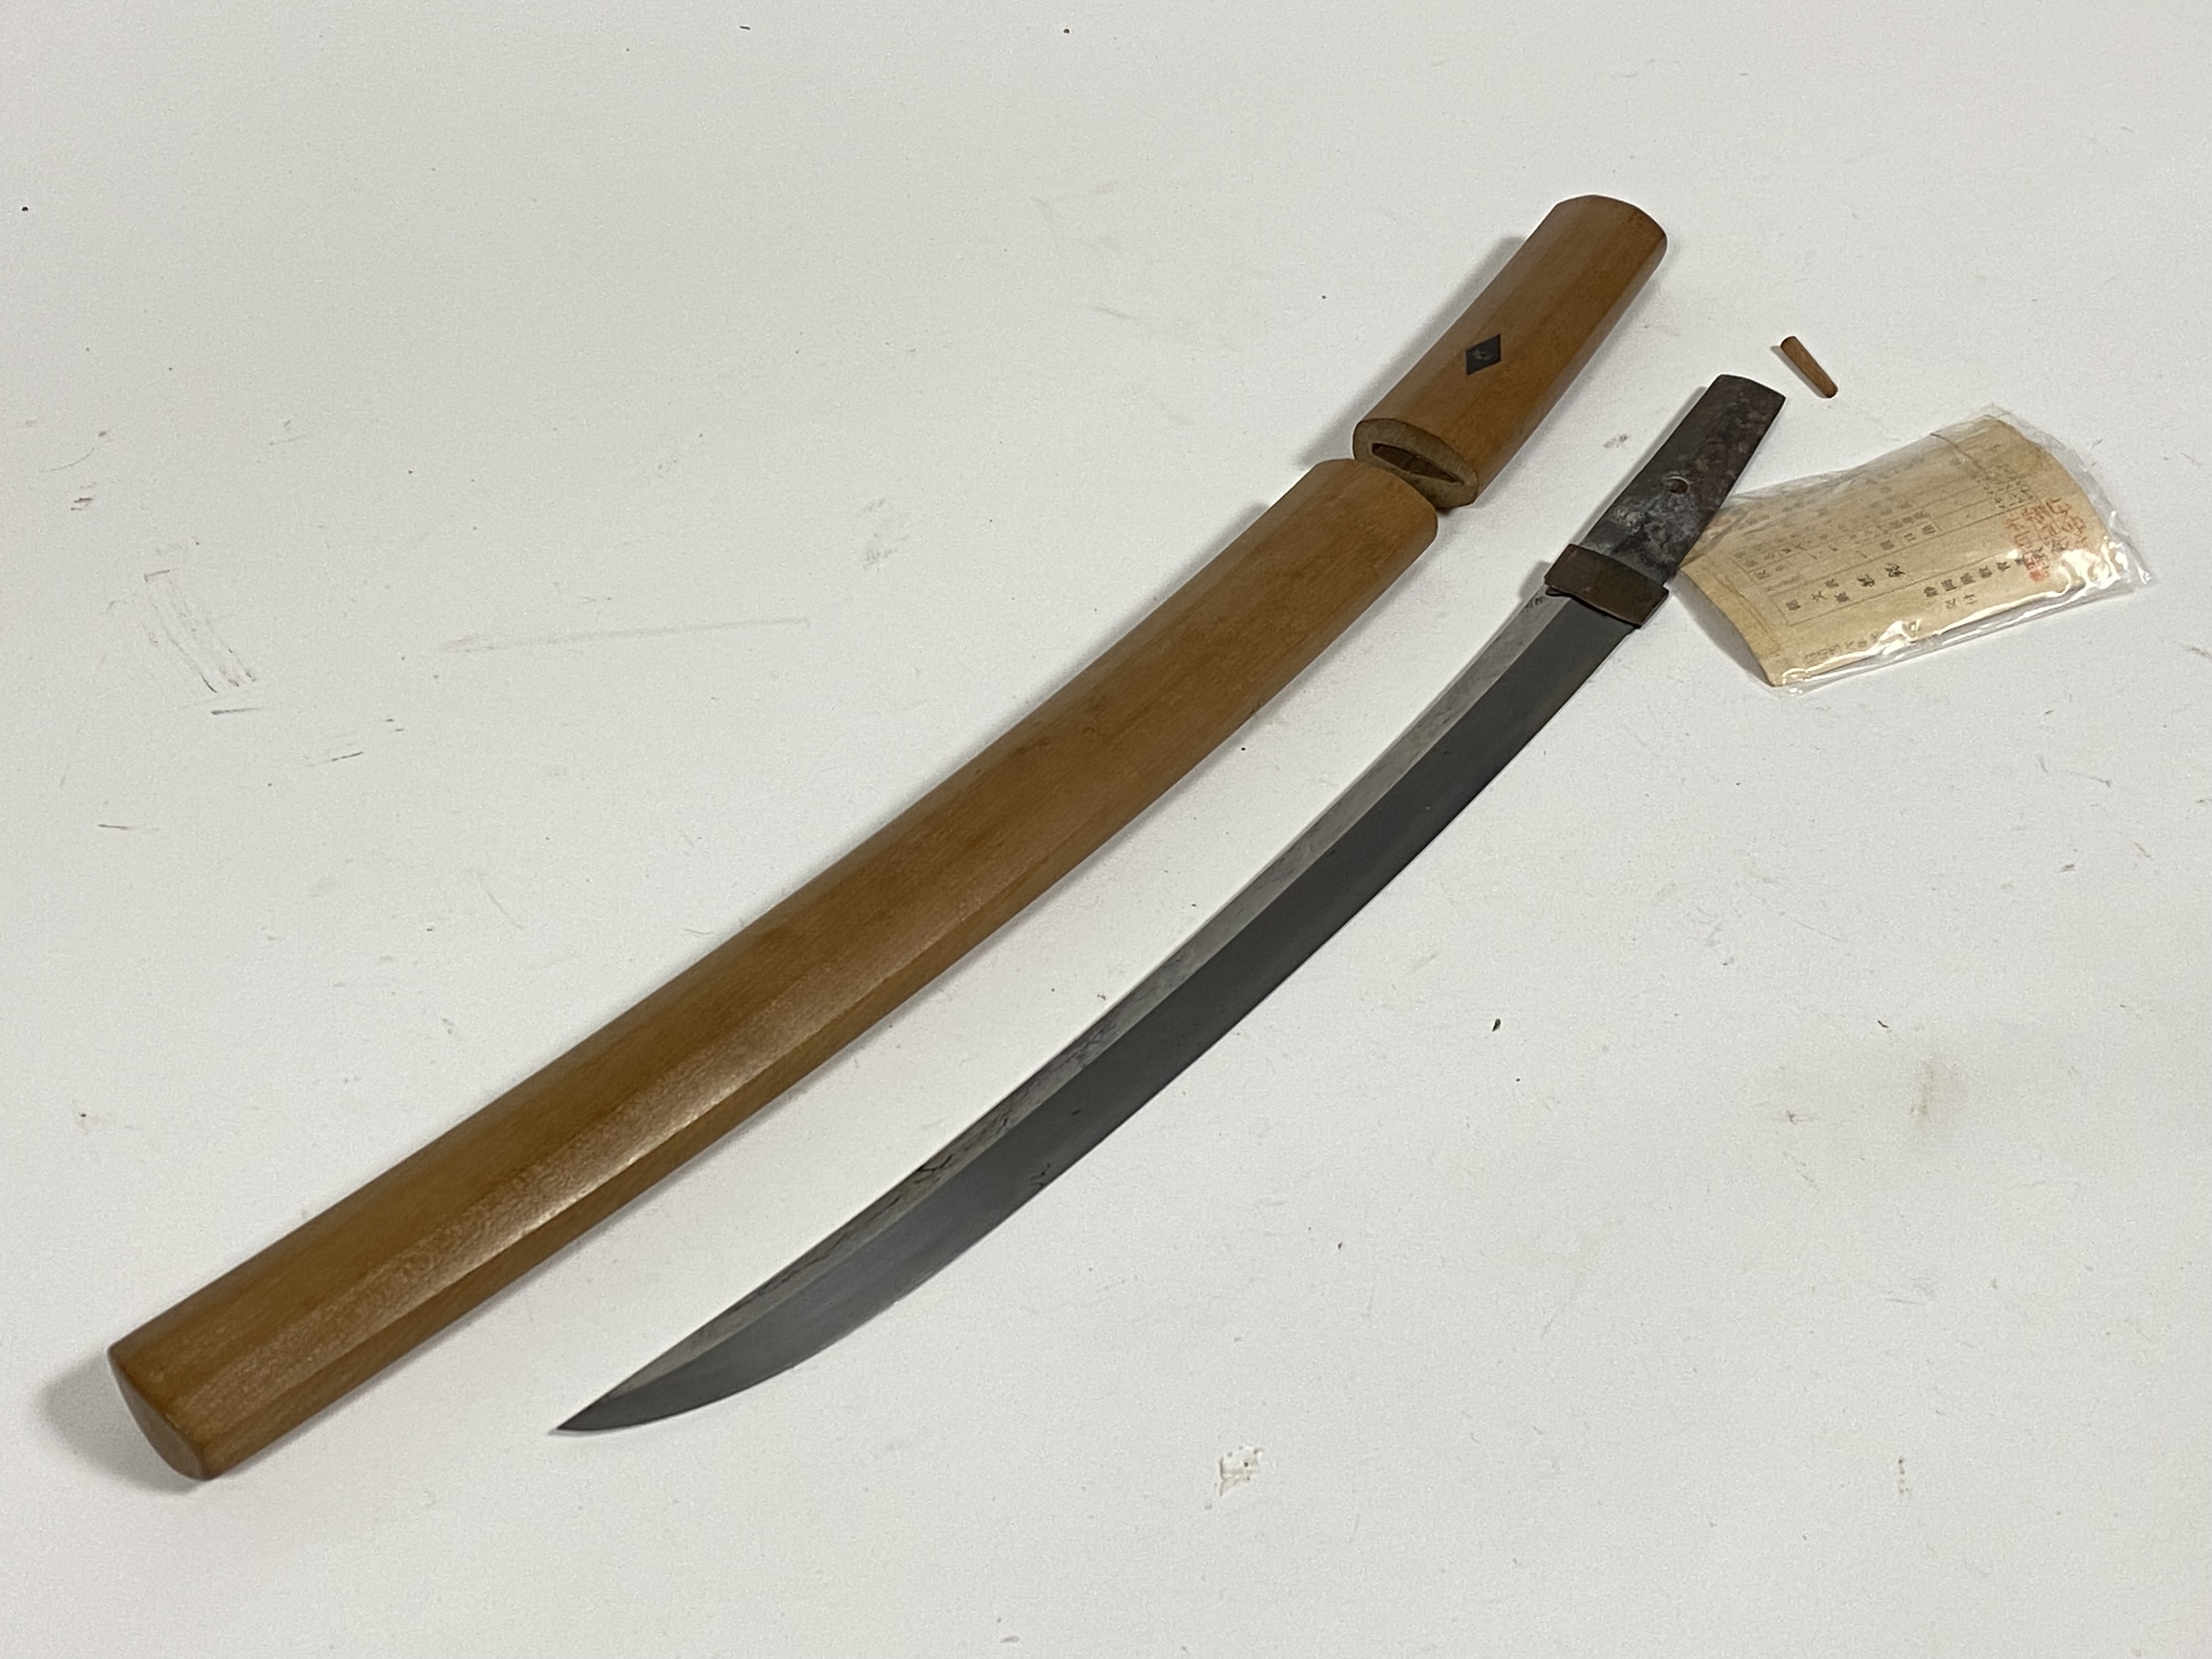 A Japanese Wakizashi sword in a shirasaya scabbard, late 19th/20th century, with a 37cm steel blade, - Image 5 of 7